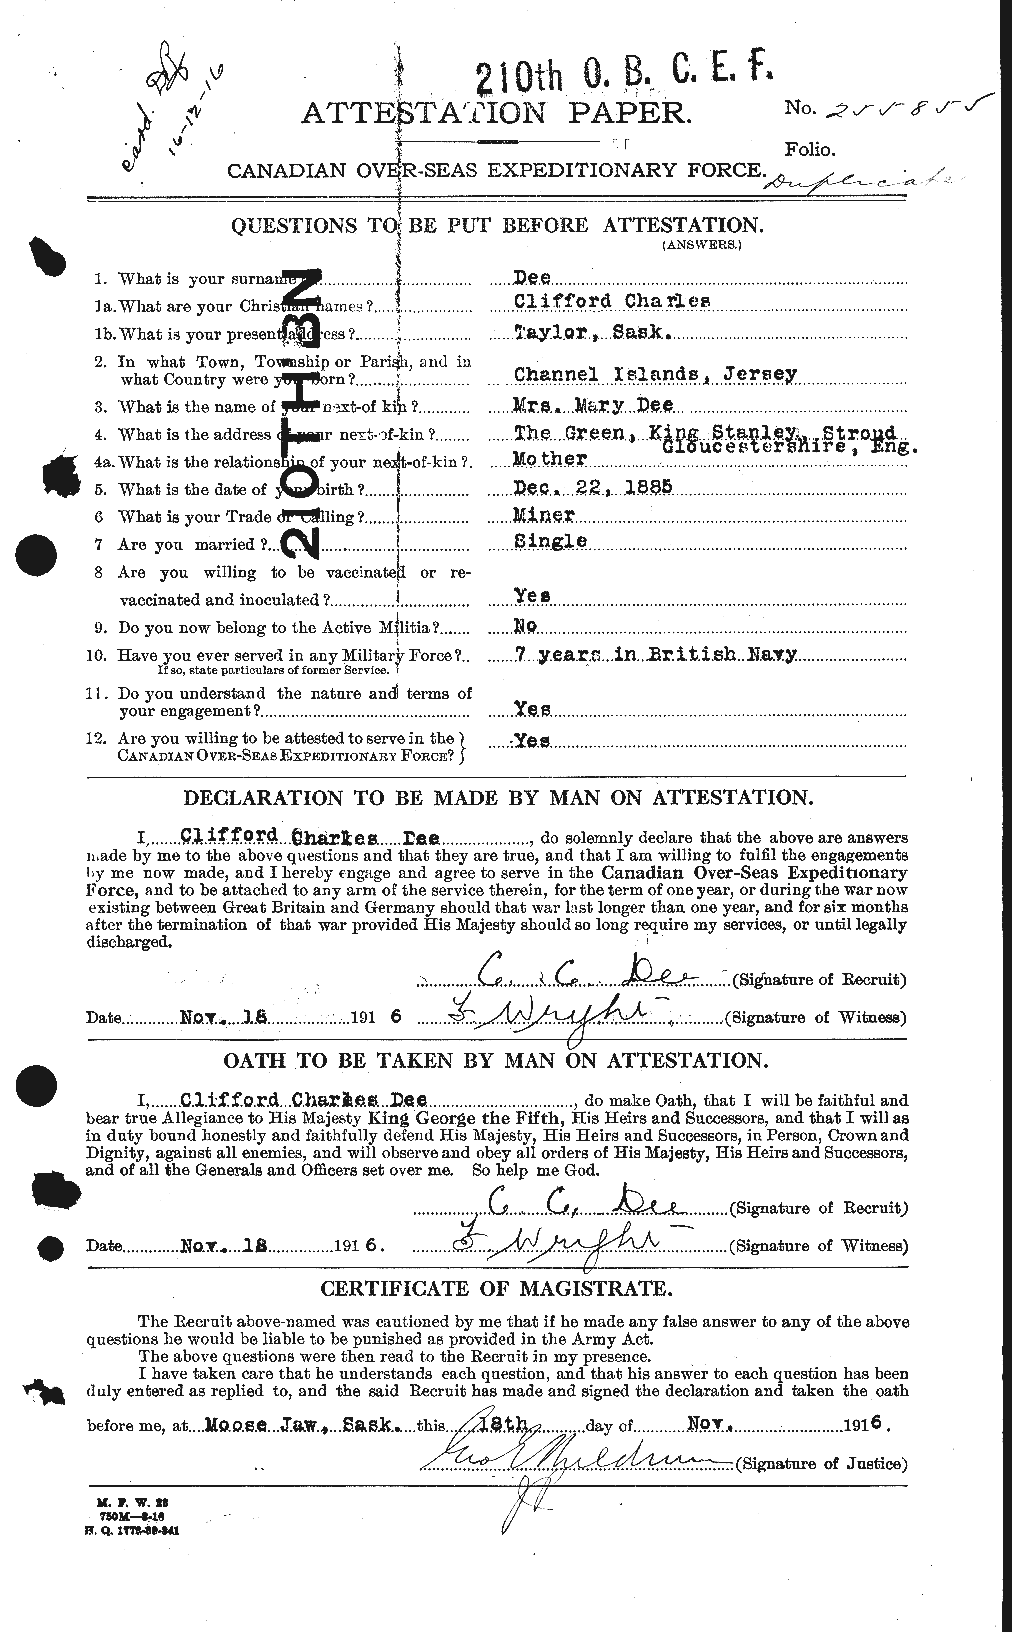 Personnel Records of the First World War - CEF 285703a